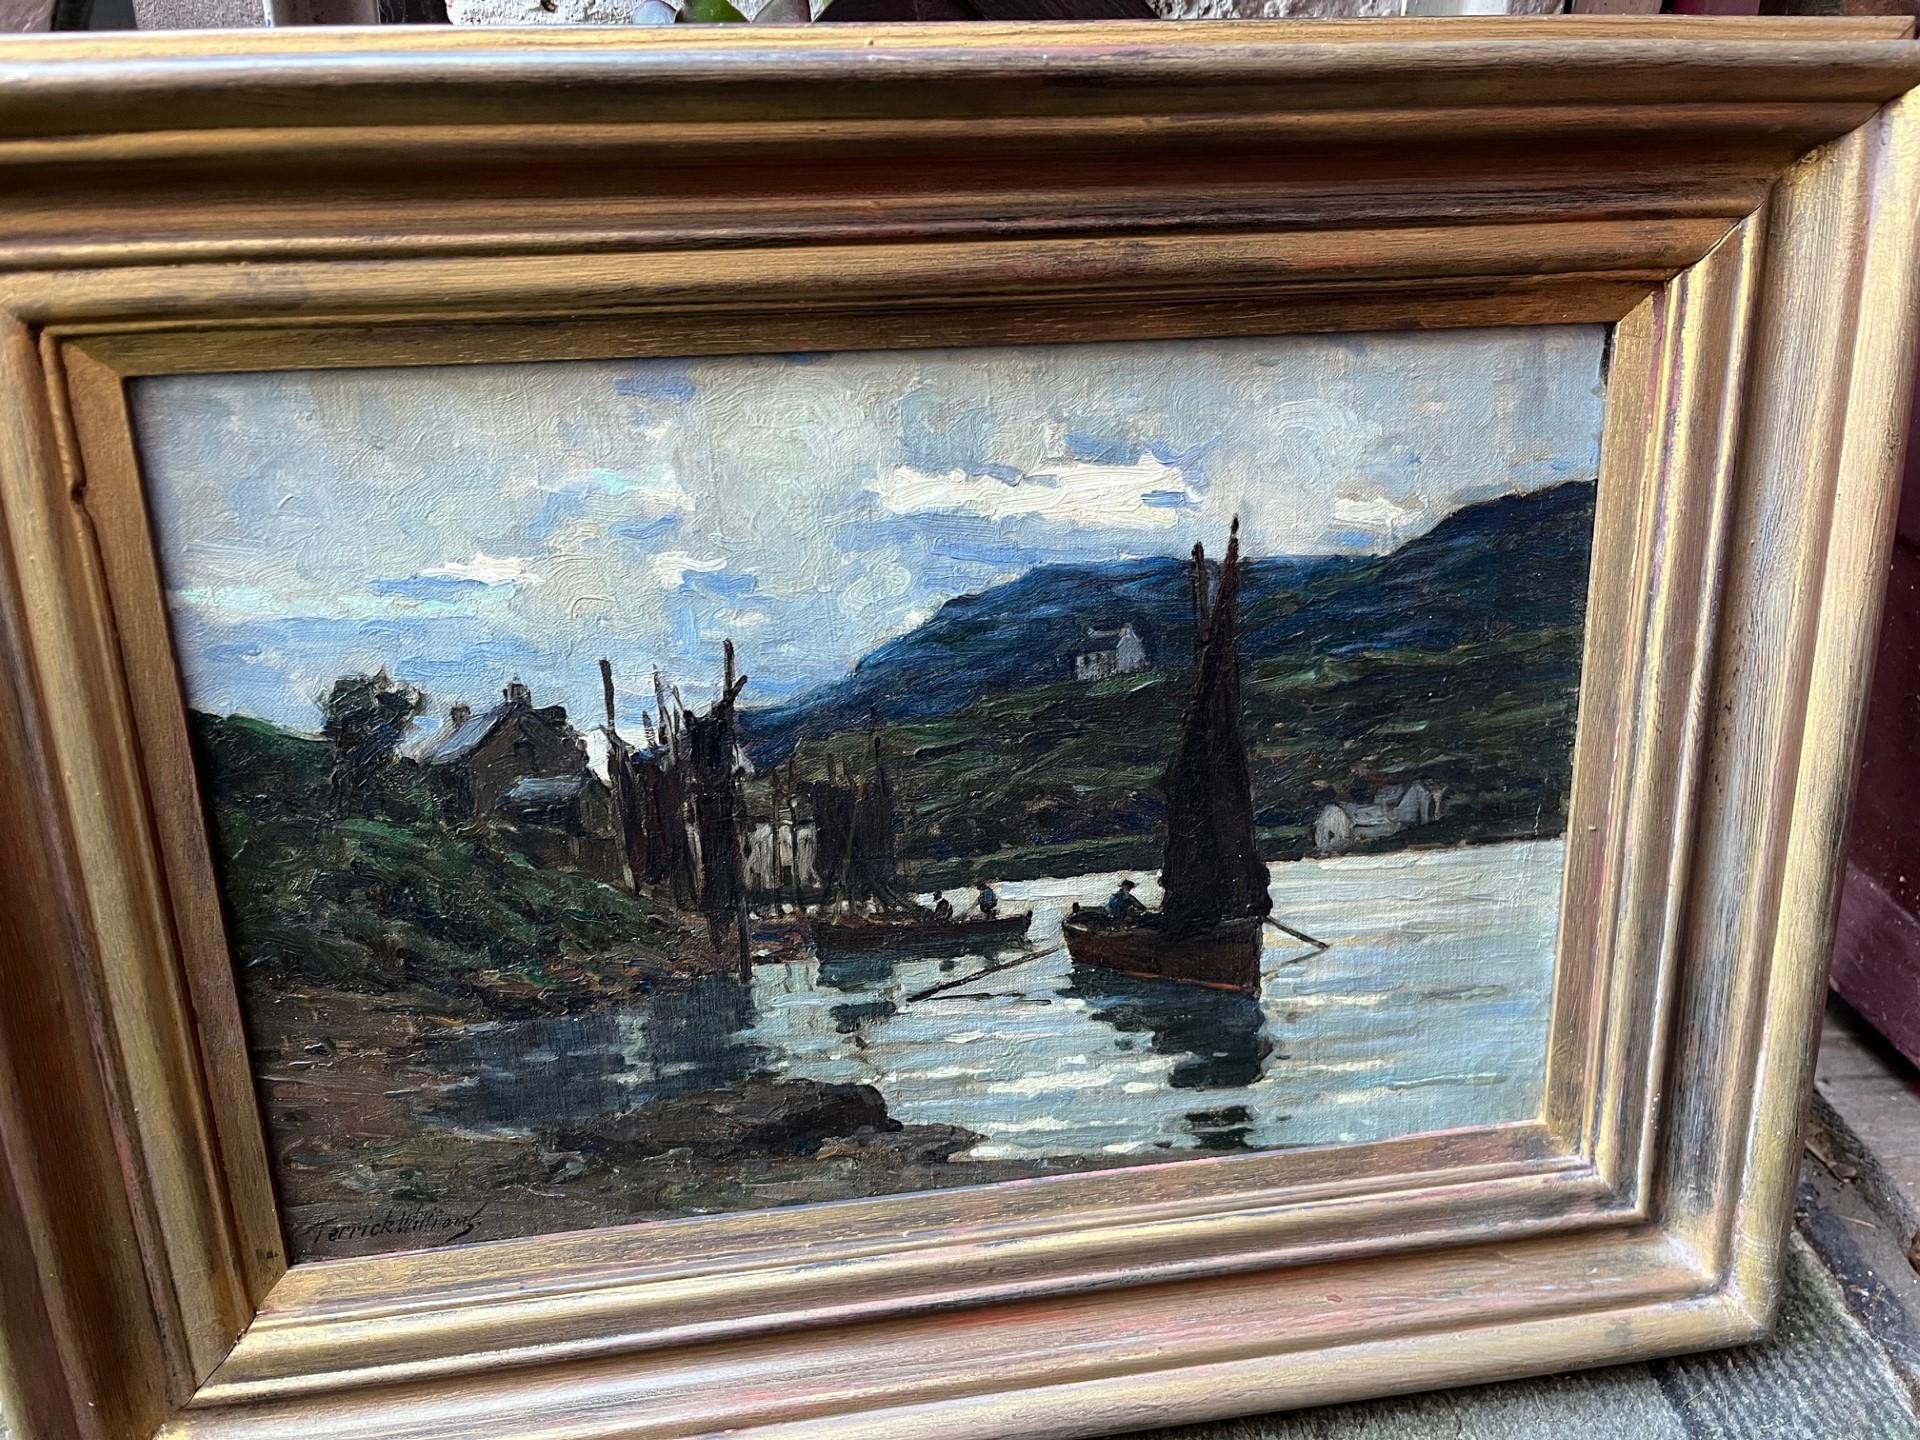  Loch Fyne Scottish Landscape. Boats in harbour with hills beyond oil, Painting - Art by Terrick Williams